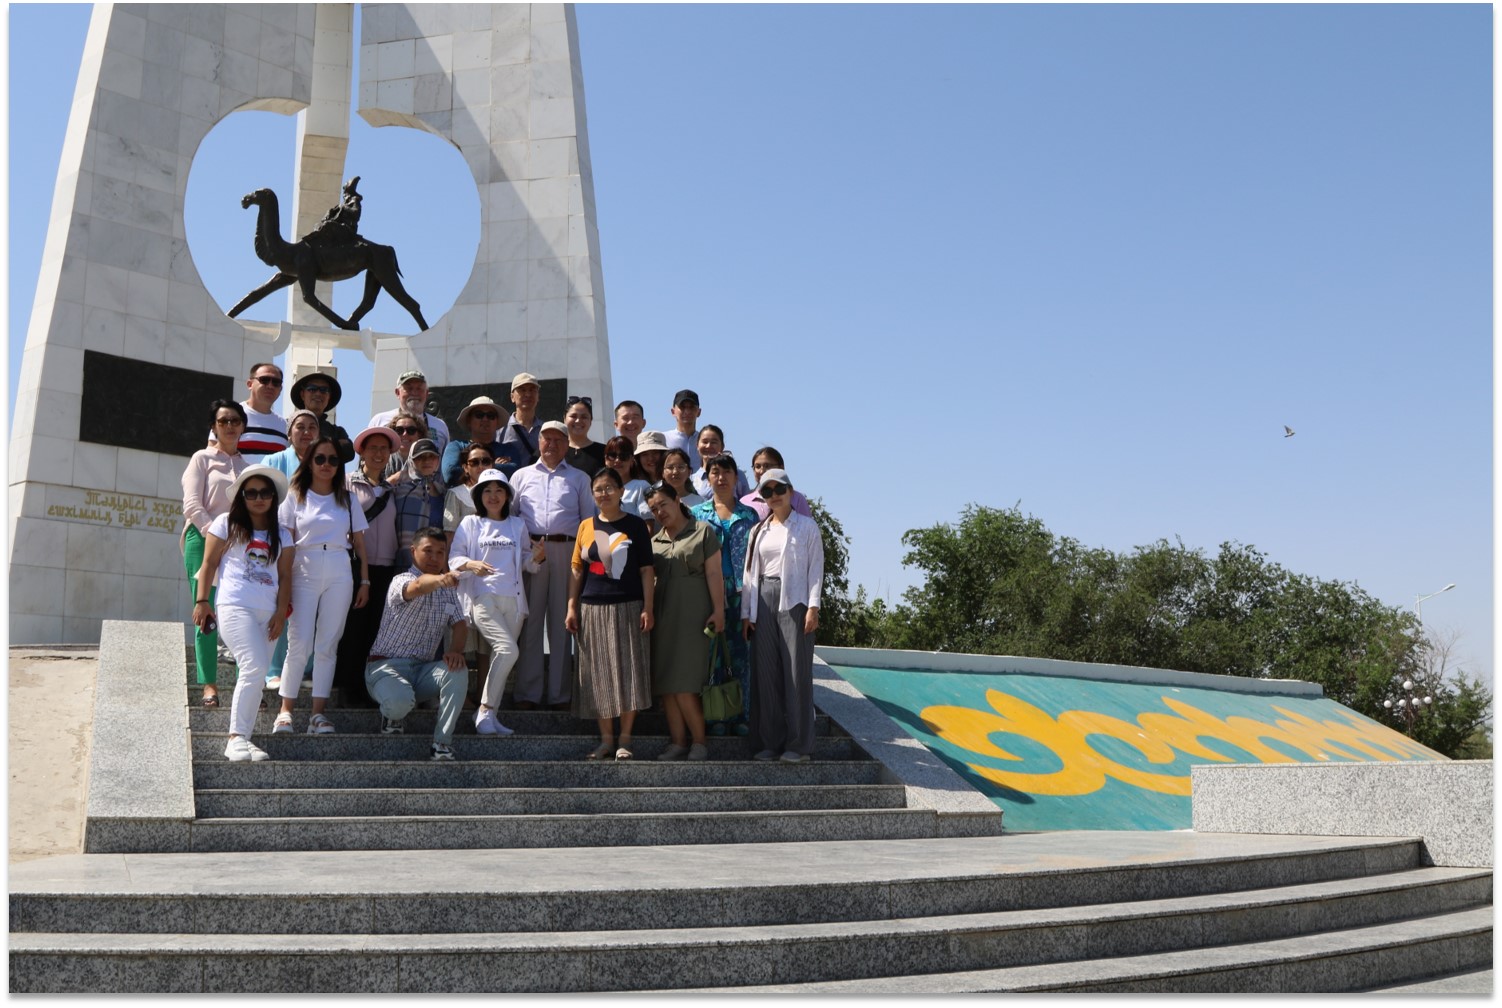 Group photo of participants participating in "Advancing Key Curriculums of Ecology and Environmental Sciences for Regional Universities in Kazakhstan and Beyond” program. 